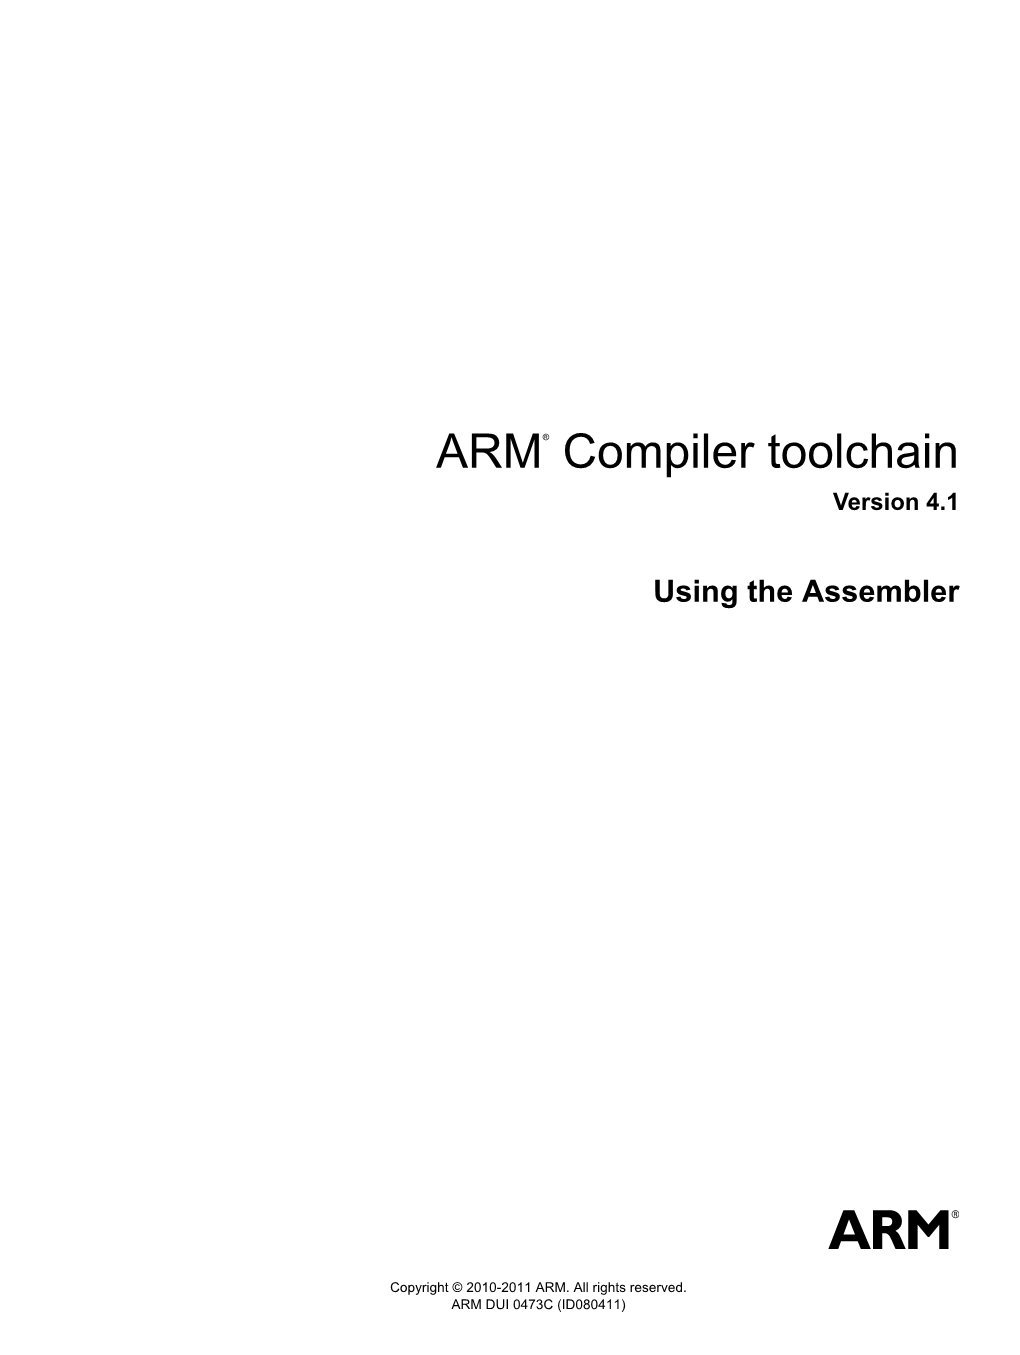 ARM Compiler Toolchain Using the Assembler